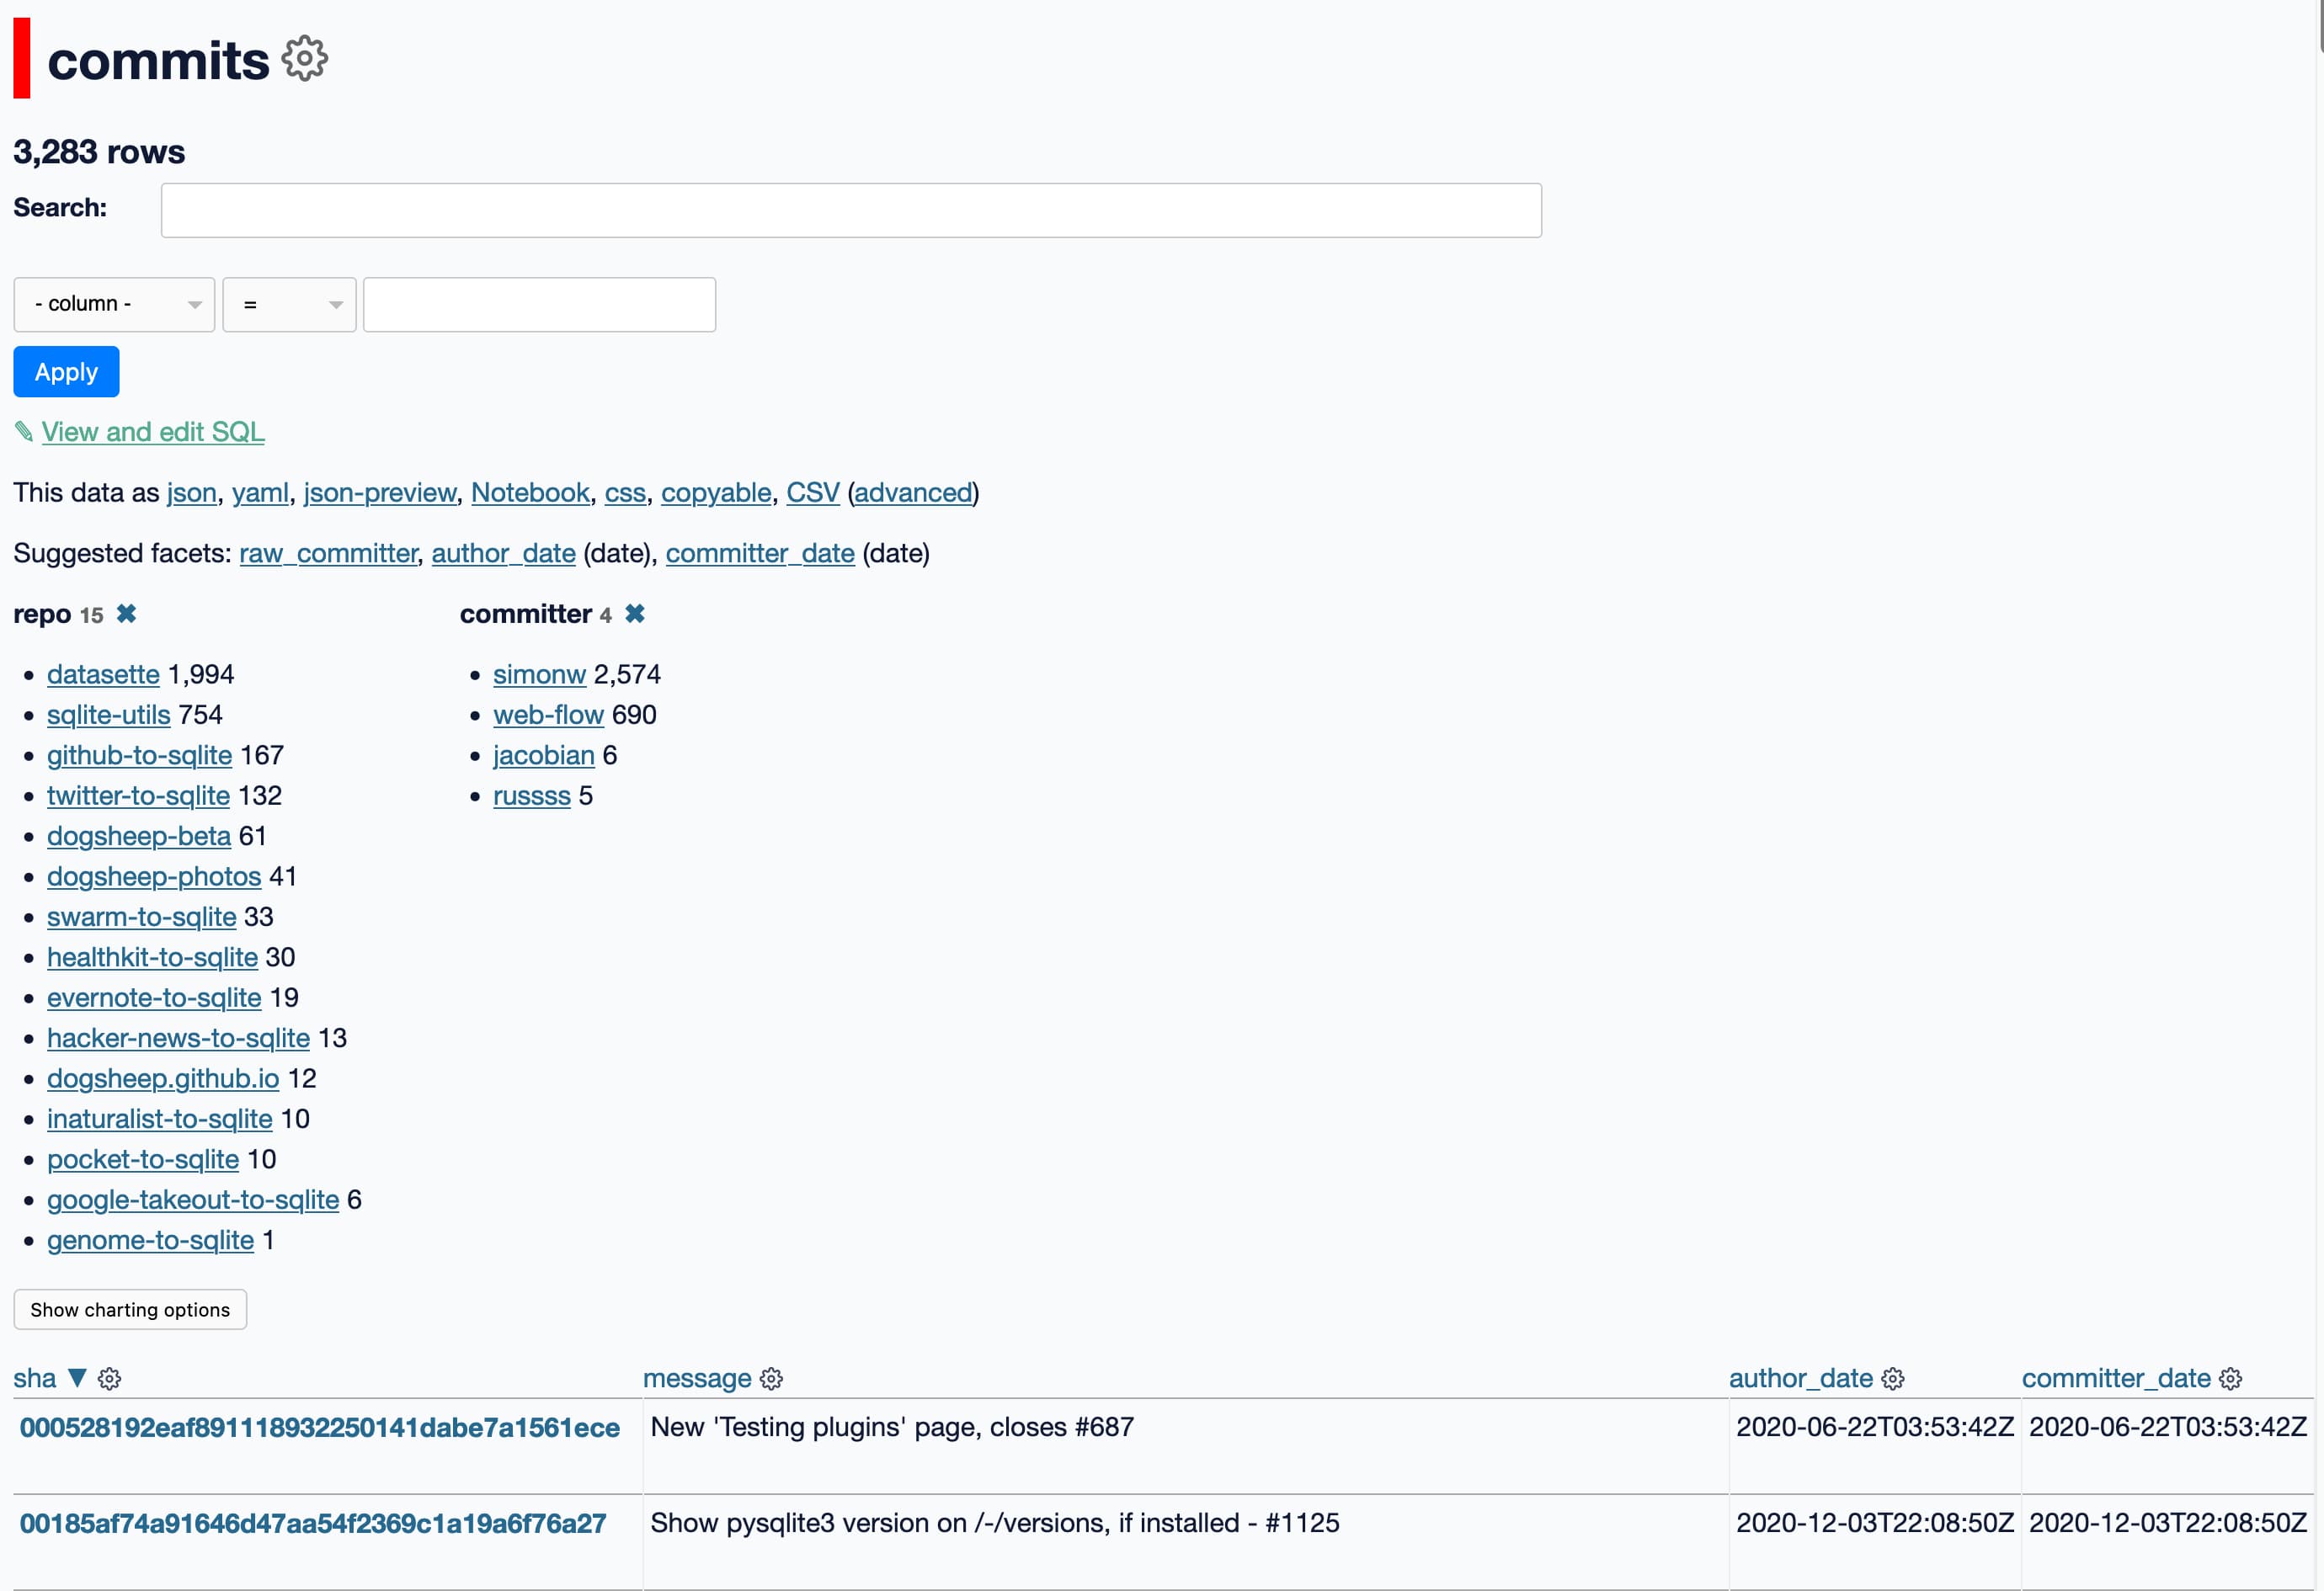 Screenshot of the commits table, showing a count and suggested facets and activated facets and some table data